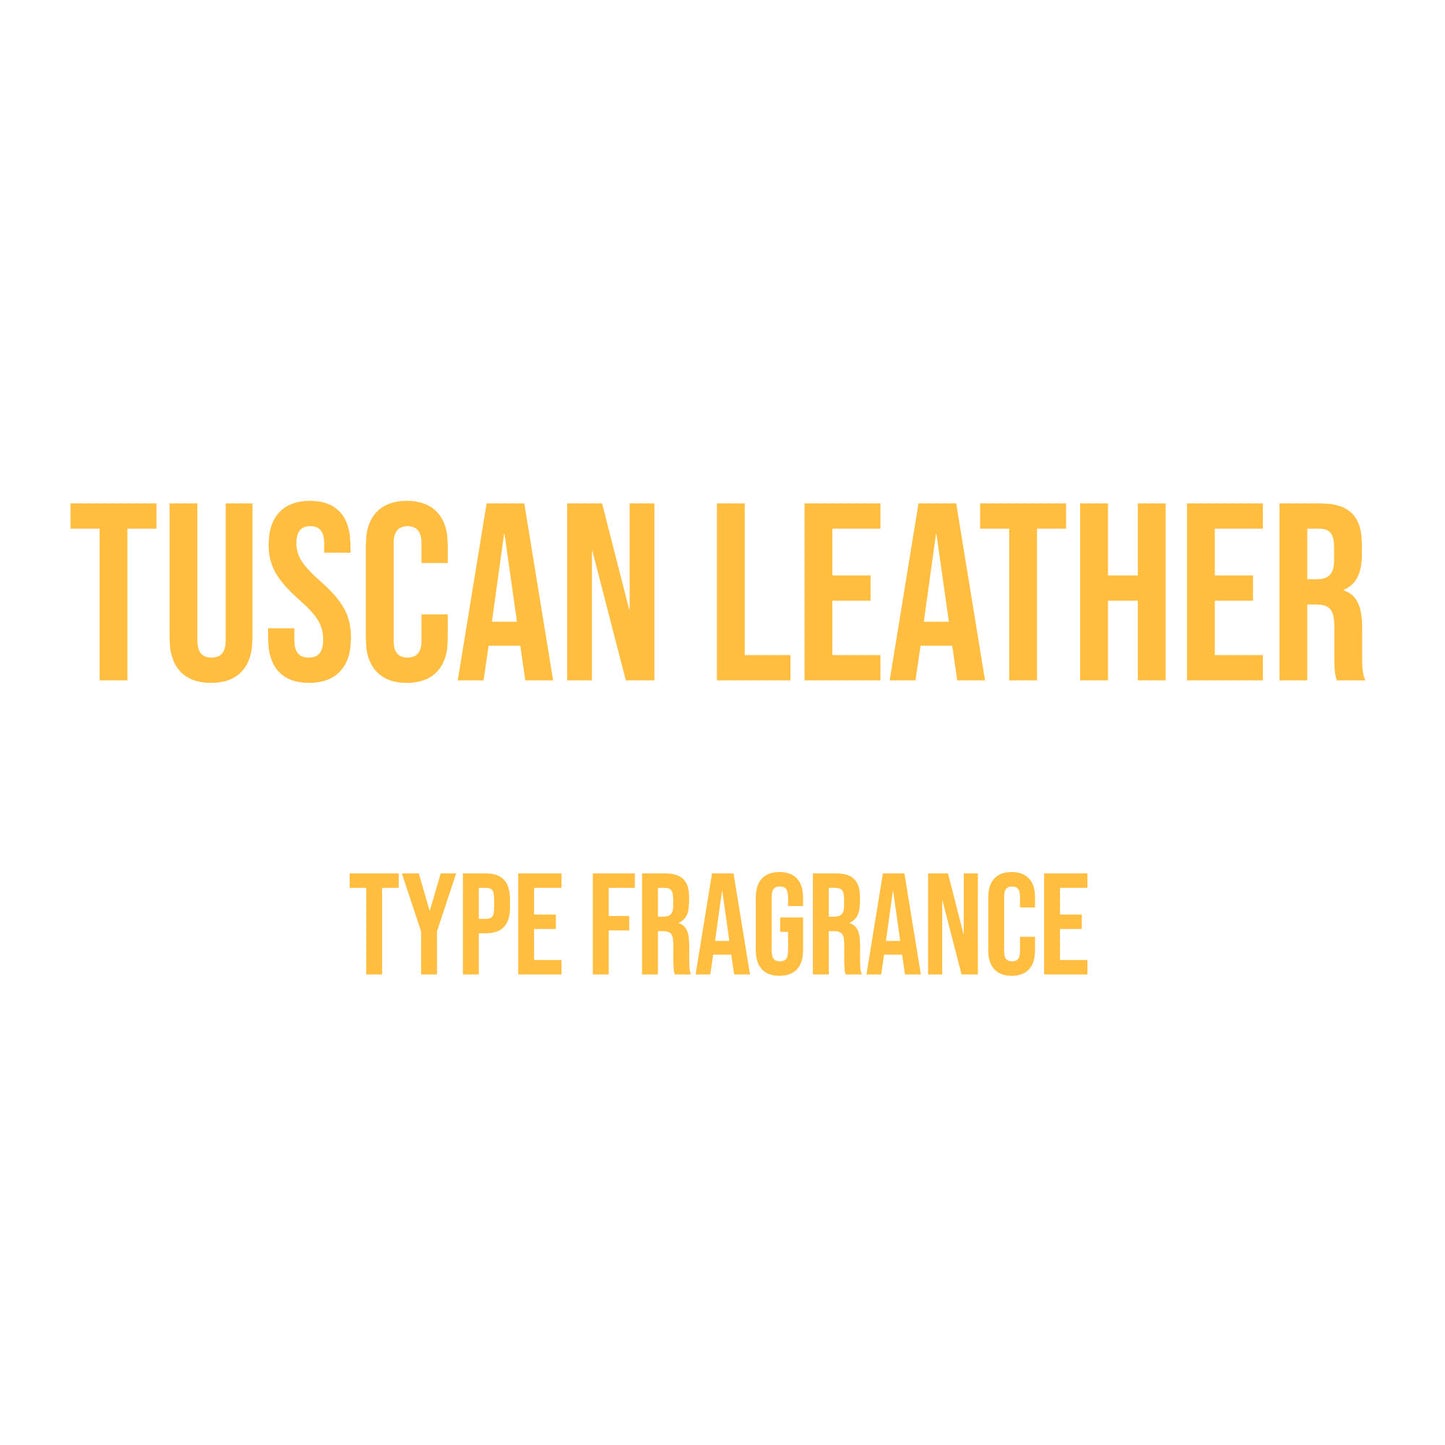 Tuscan Leather Type Fragrance